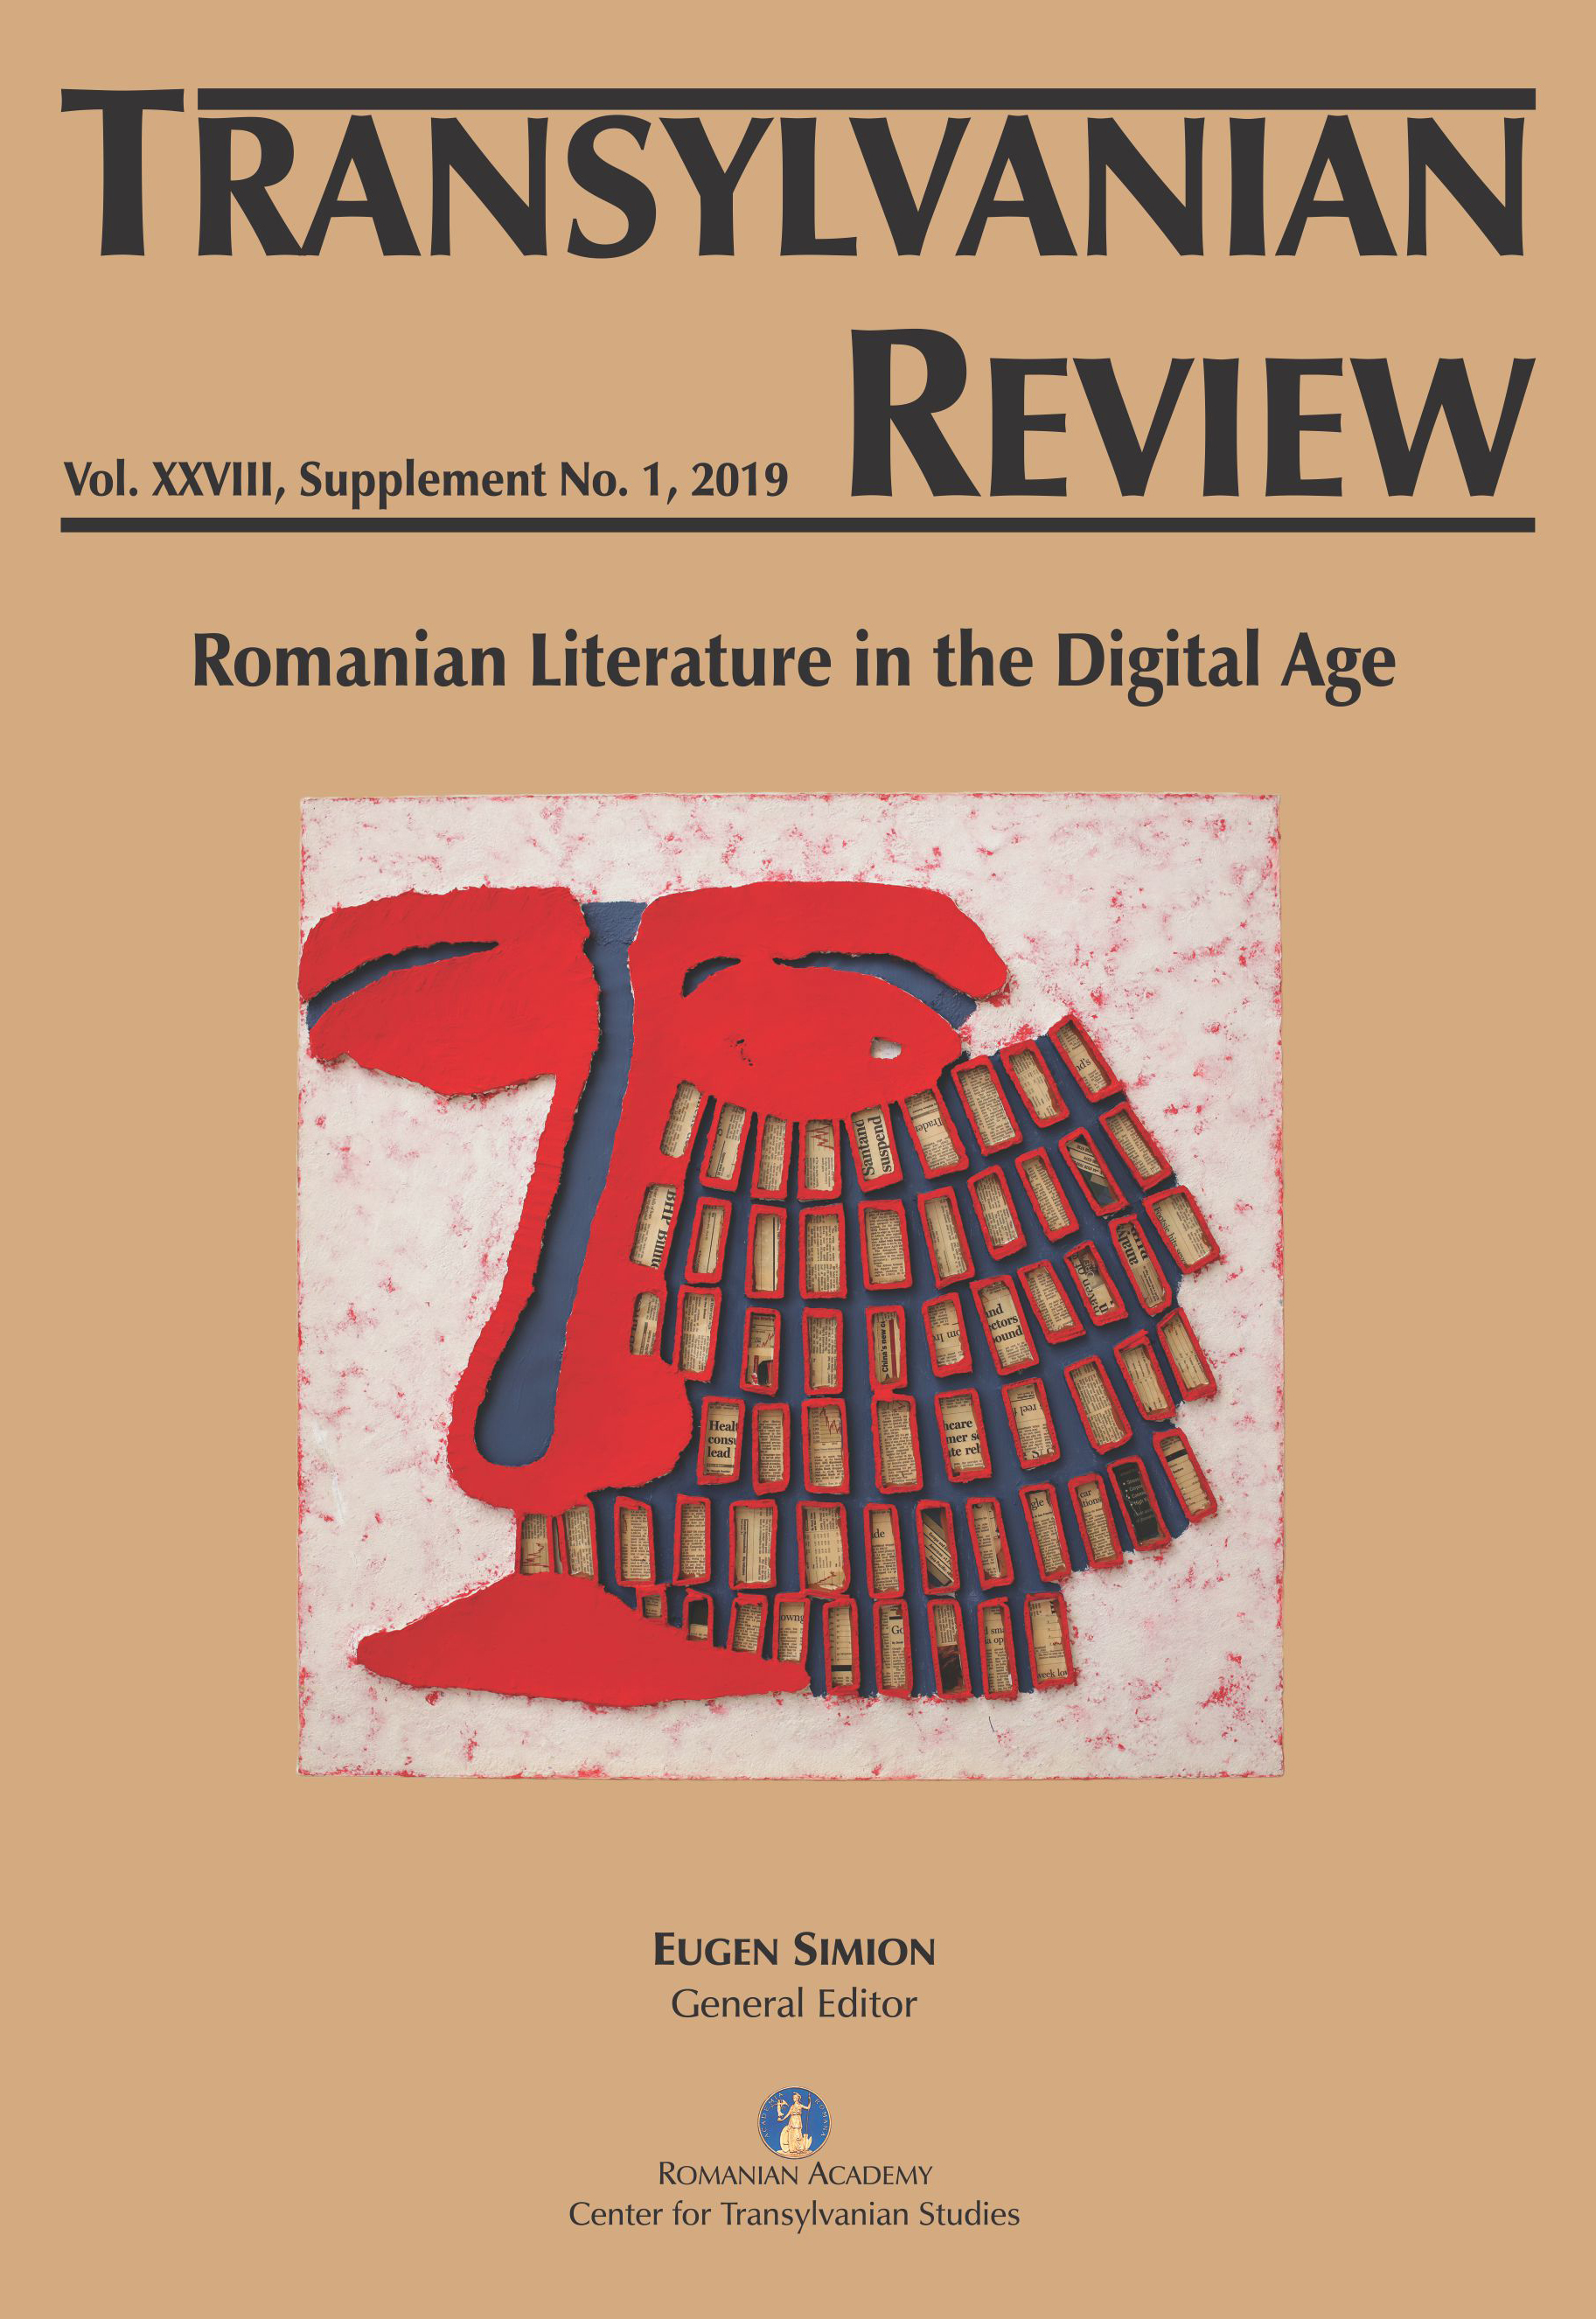 A New Digital Solution for Promoting of the Romanian Literary Patrimony